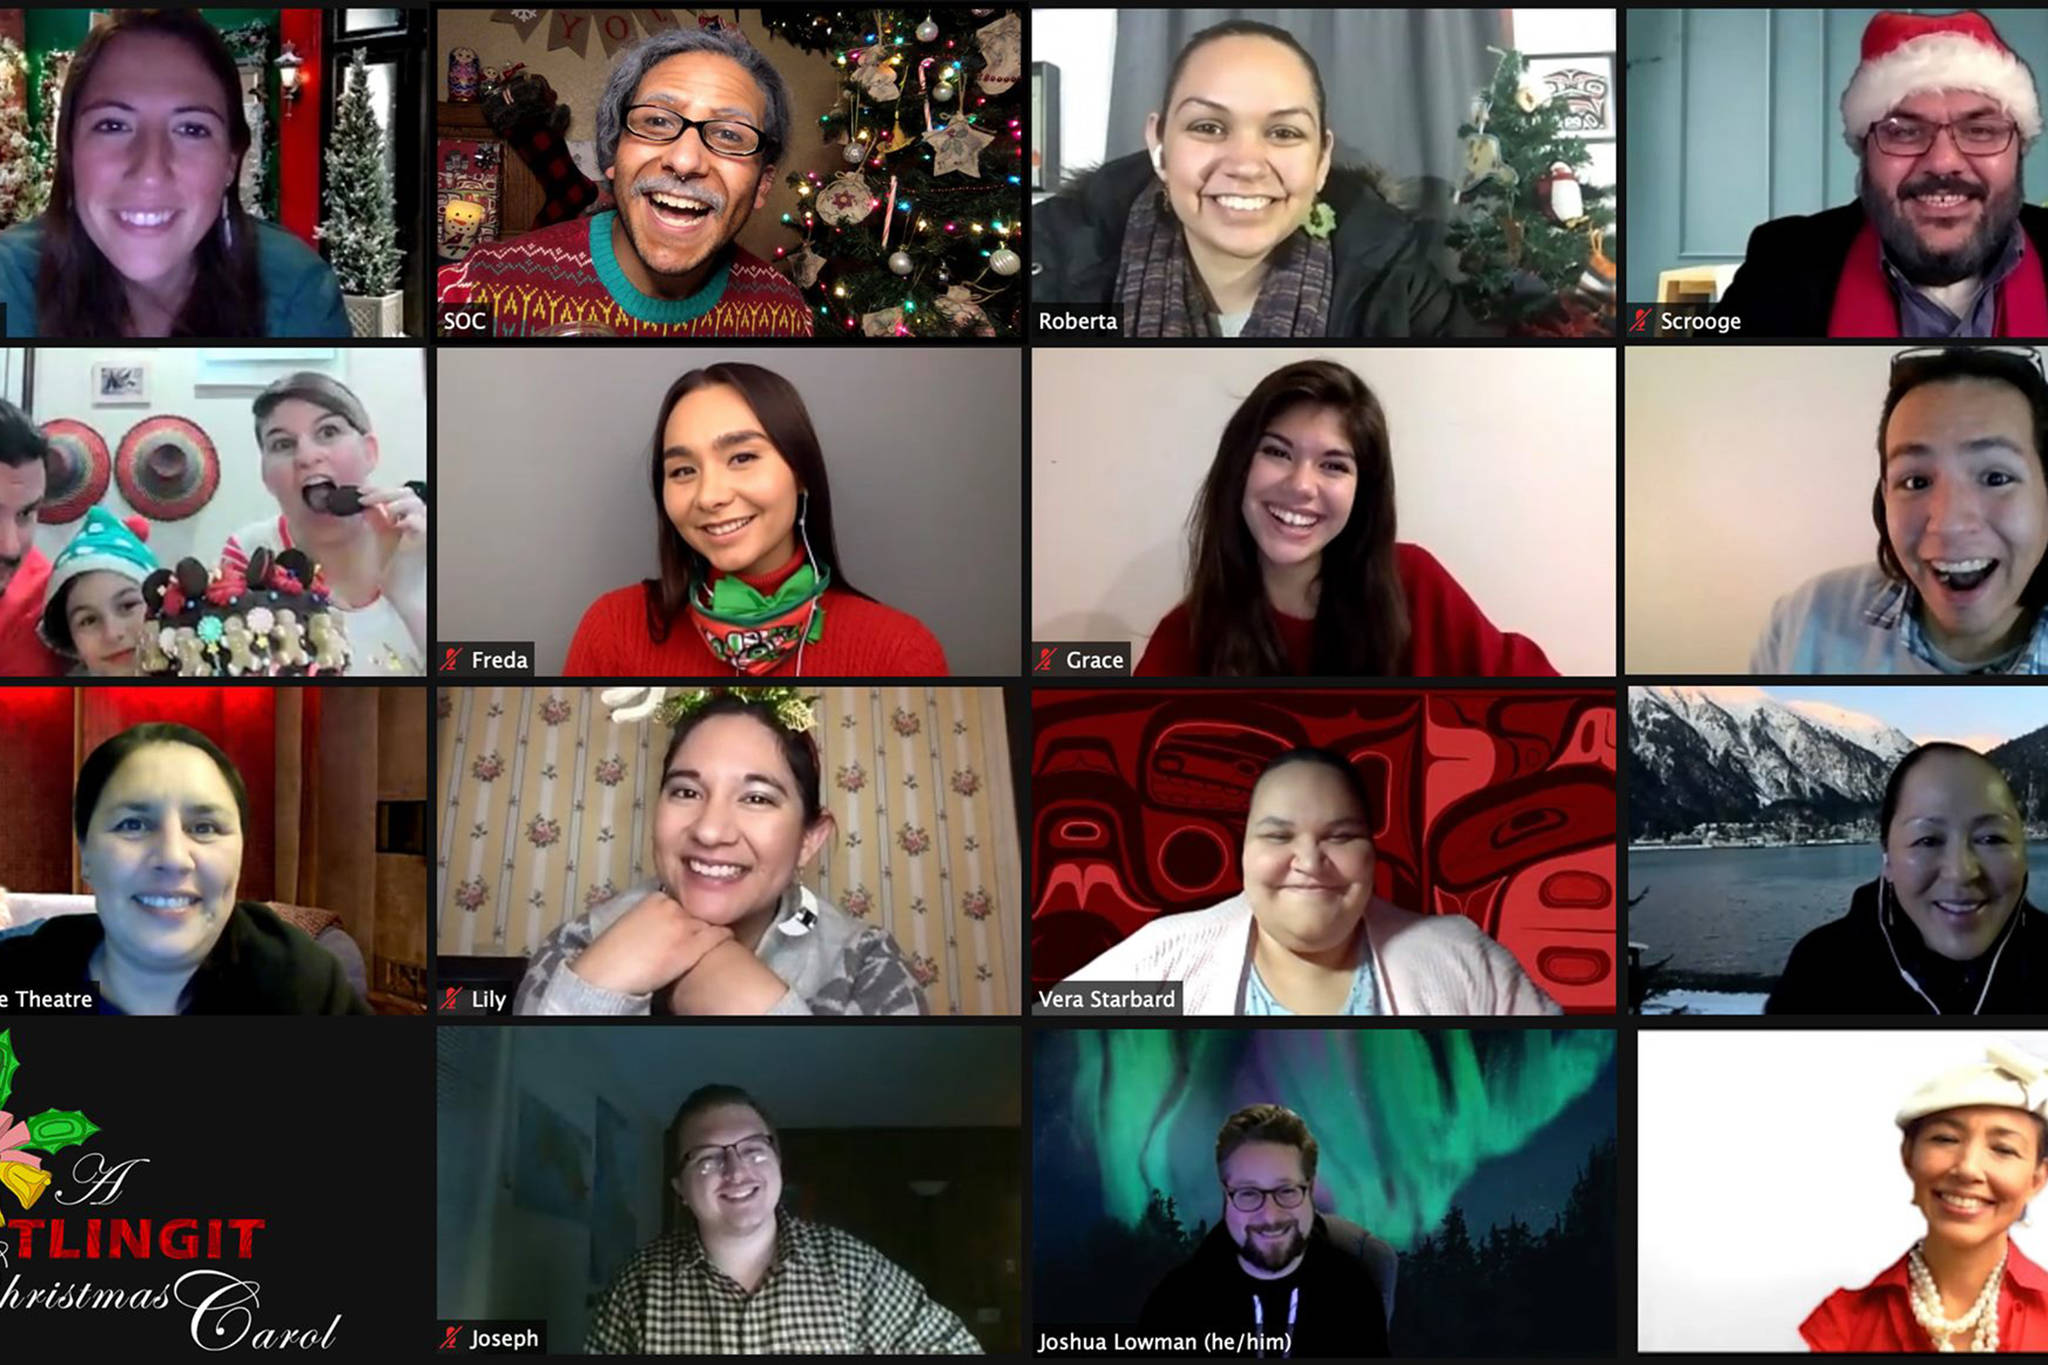 The cast and crew behind “A Tlingit Christmas Carol” smile on a Zoom call. (Courtesy Image / Perseverance Theatre)